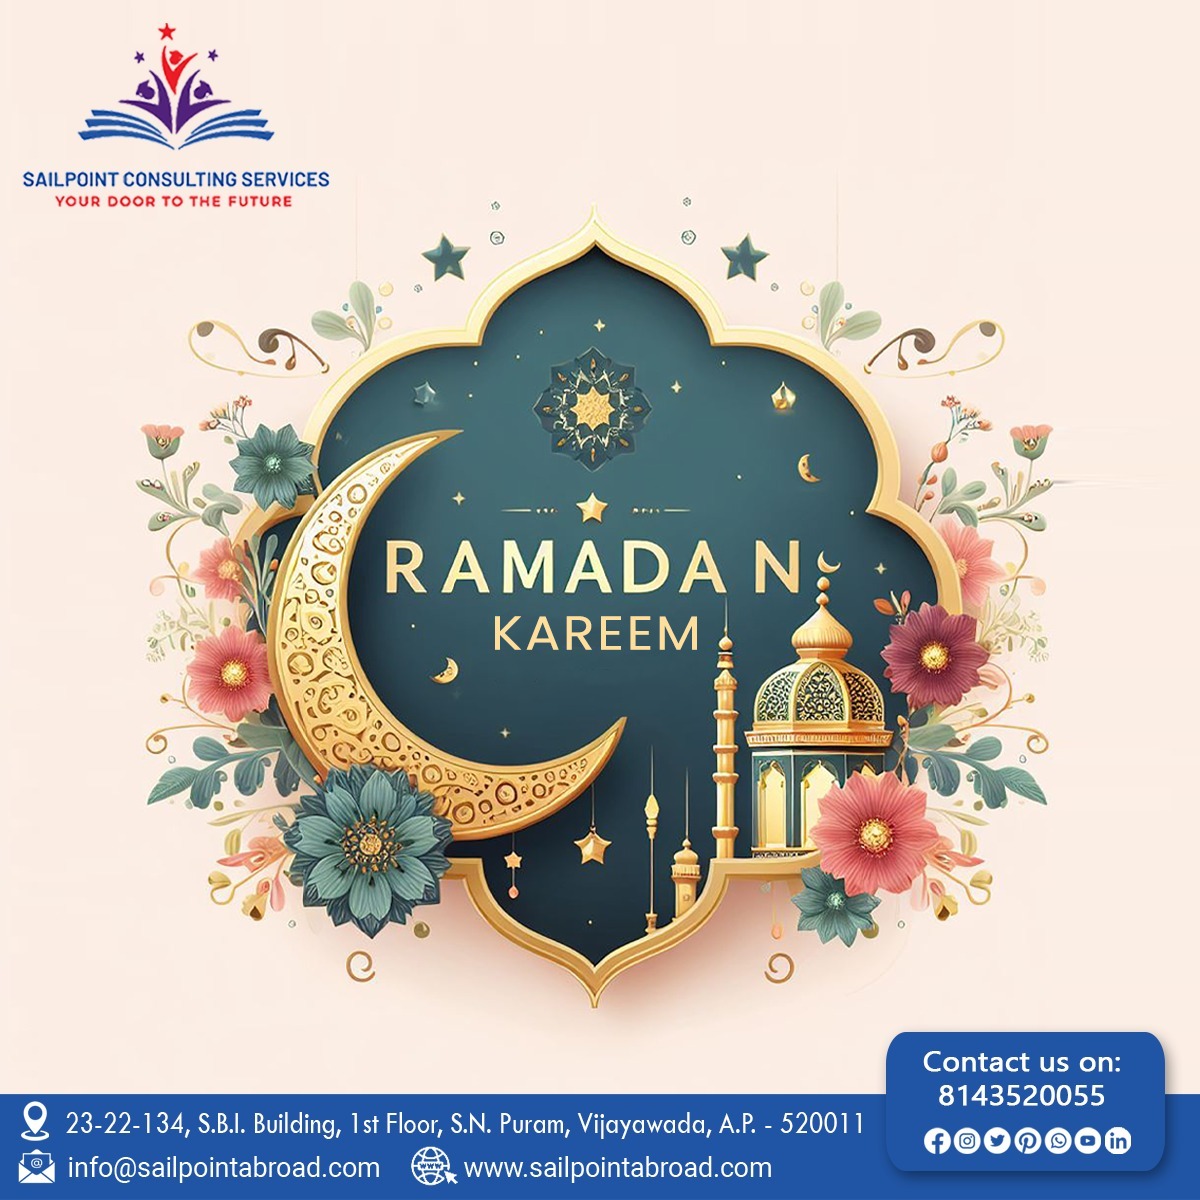 Eid Mubarak! May this special occasion bring love, peace, and prosperity to your life.   Connect with our experts and grab the best opportunities #abroadstudies #sailpointconsultancy #sailpointconsultingservices #ramadan #eid #Ramadan2024